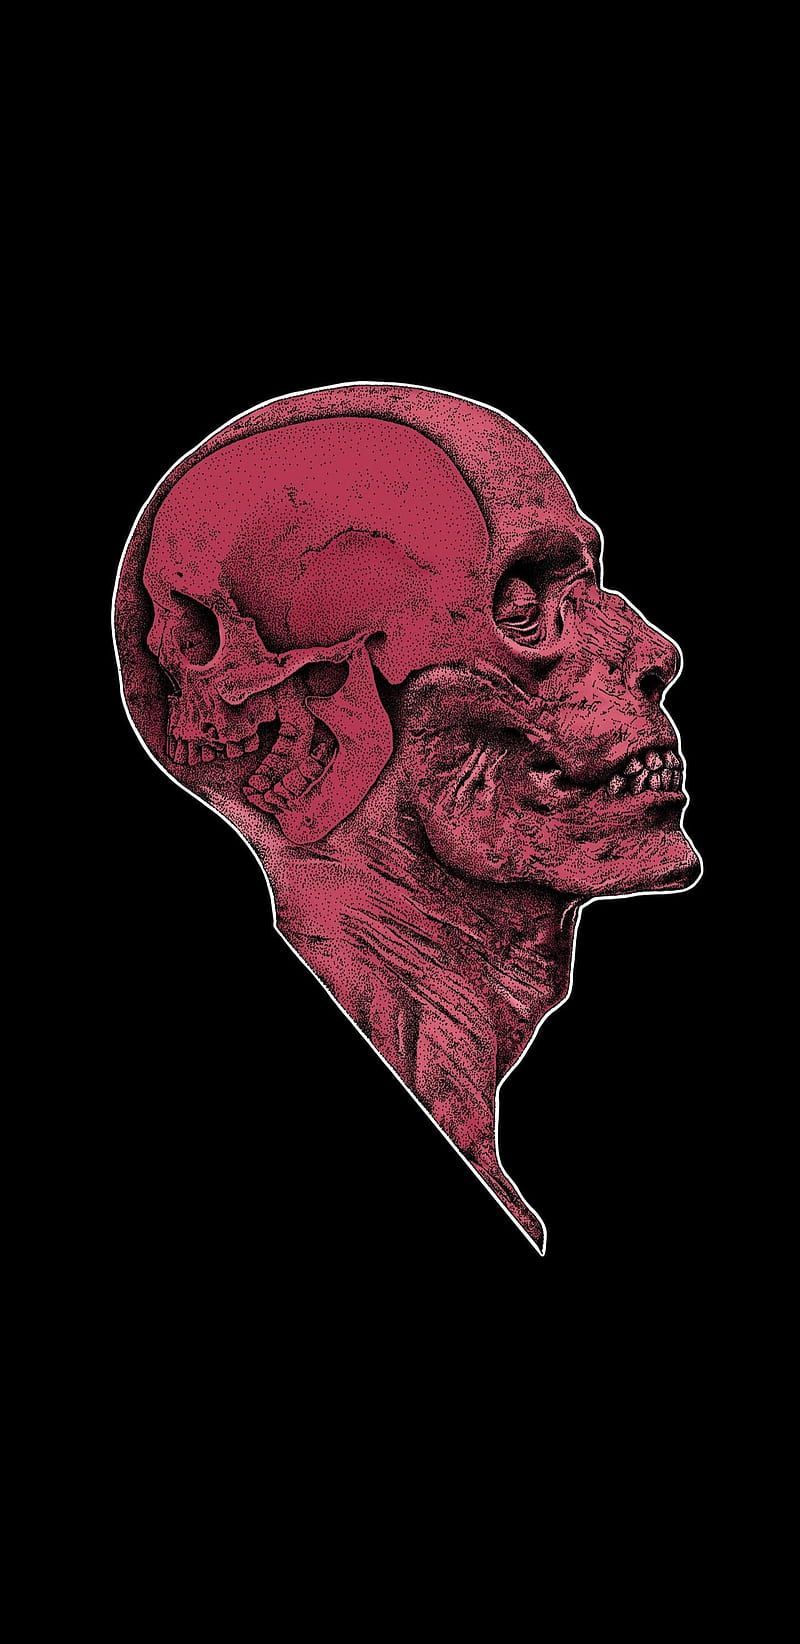 A red and black image of the head - Anatomy